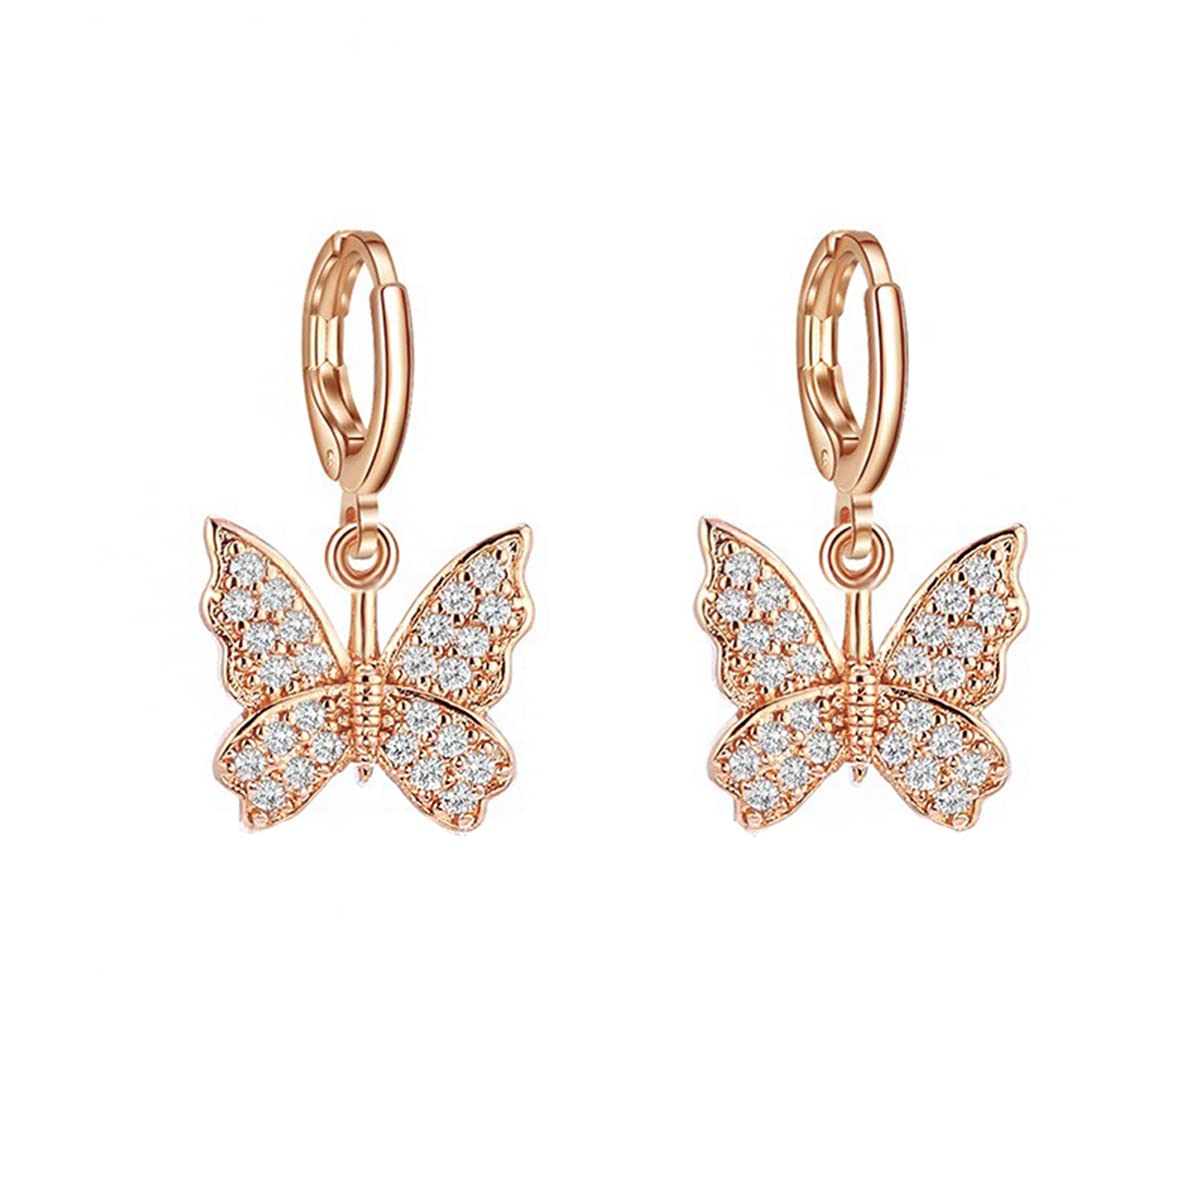 Yellow Chimes Earrings for Women and Girls Rosegold Crystal Hoops | Rose Gold Plated Butterfly Shaped Hoop Earrings | Birthday Gift for girls and women Anniversary Gift for Wife